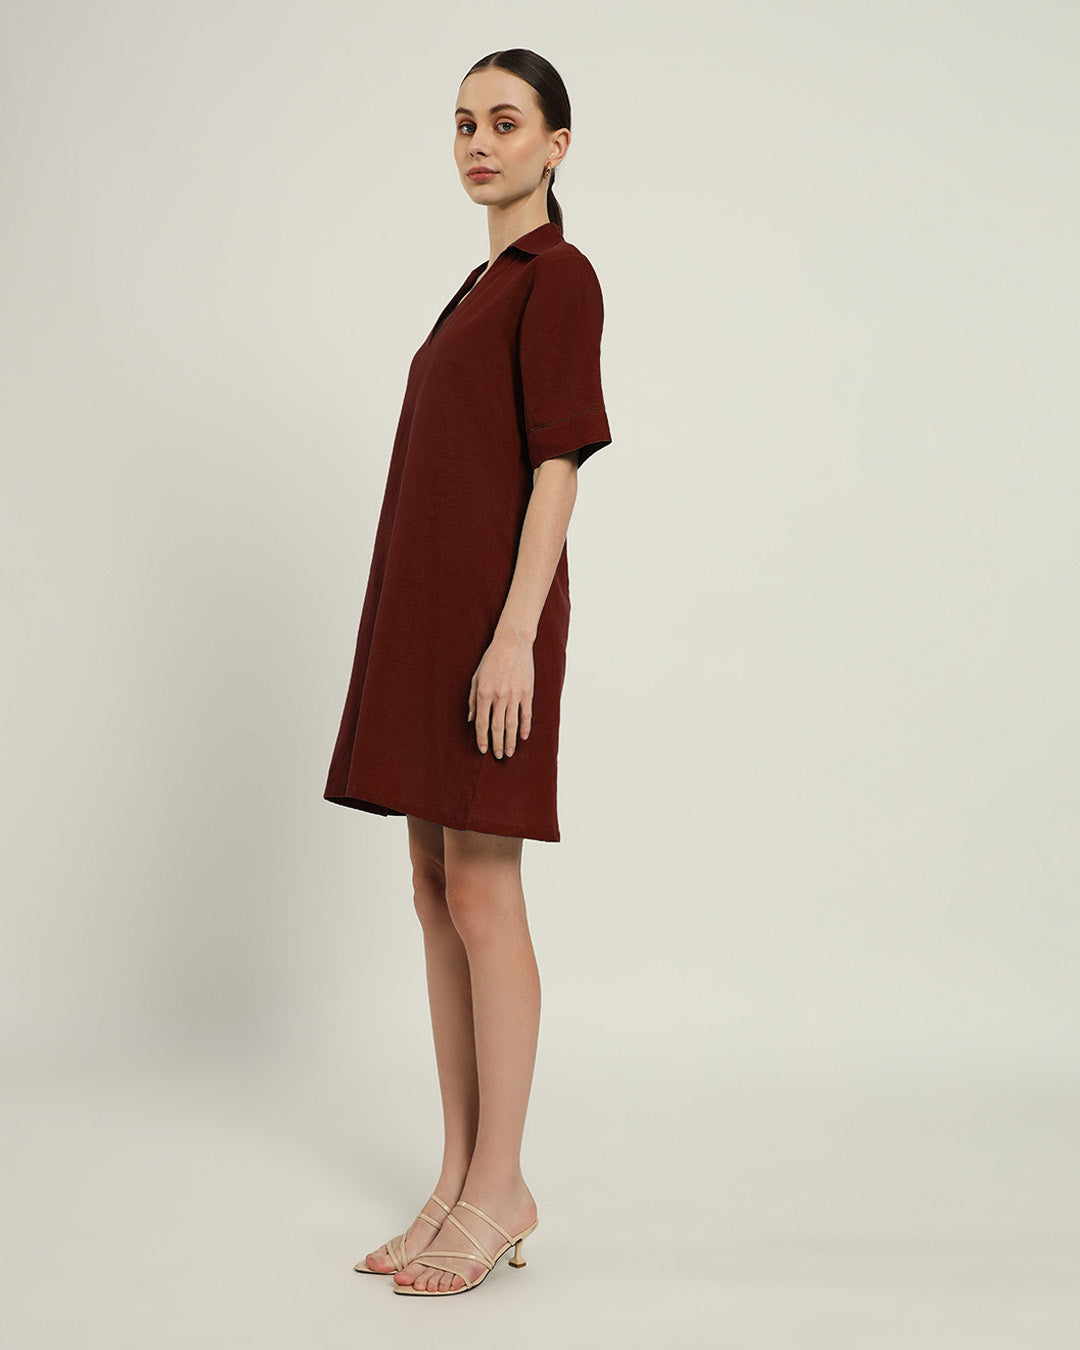 The Ermont Rouge Dress